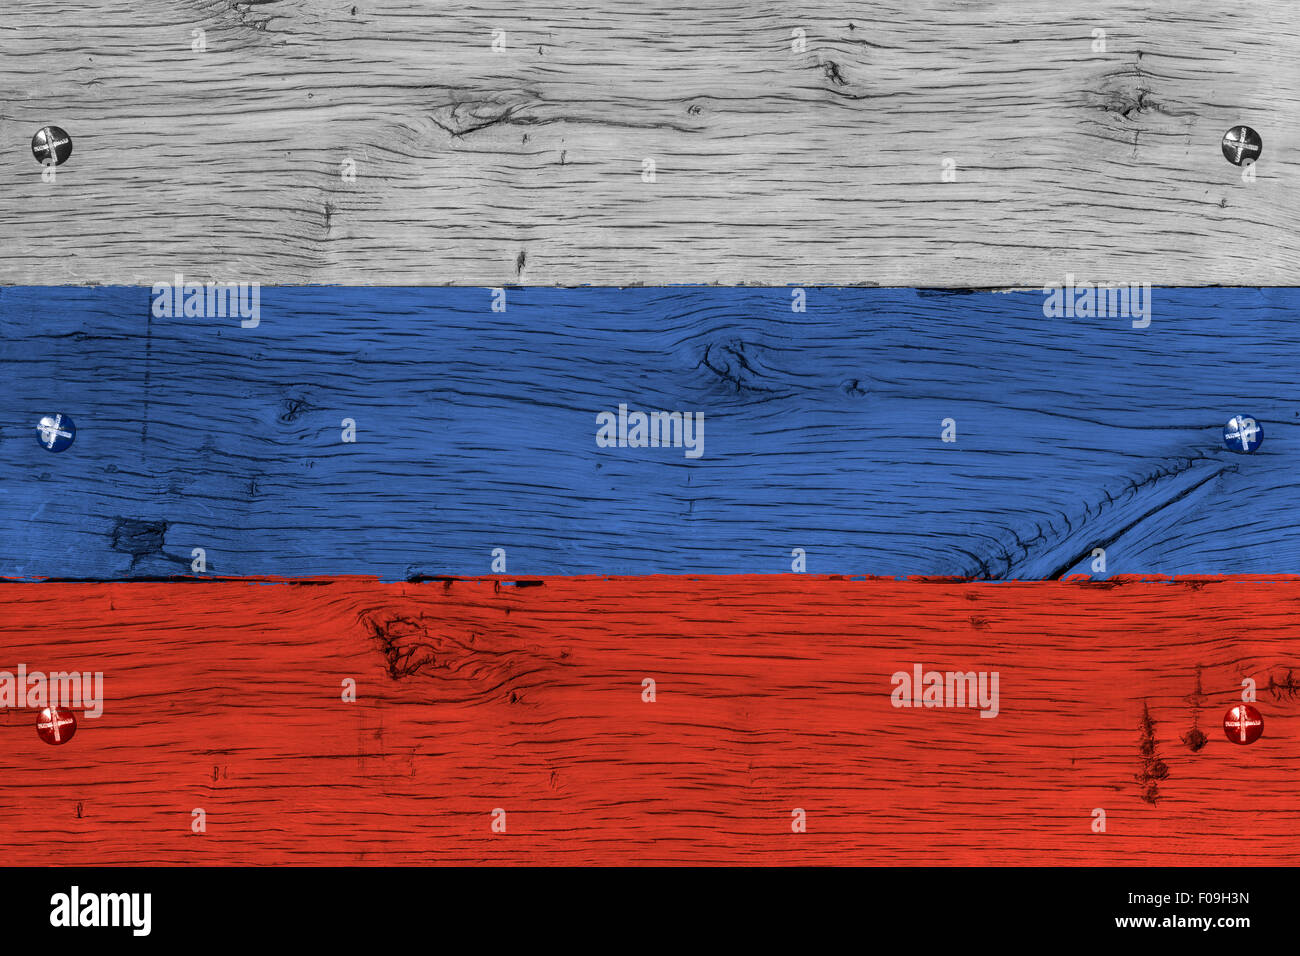 Russia,  Russian Federation national flag. Painting is colorful on wood of old train carriage. Fastened by screws or bolts. Stock Photo